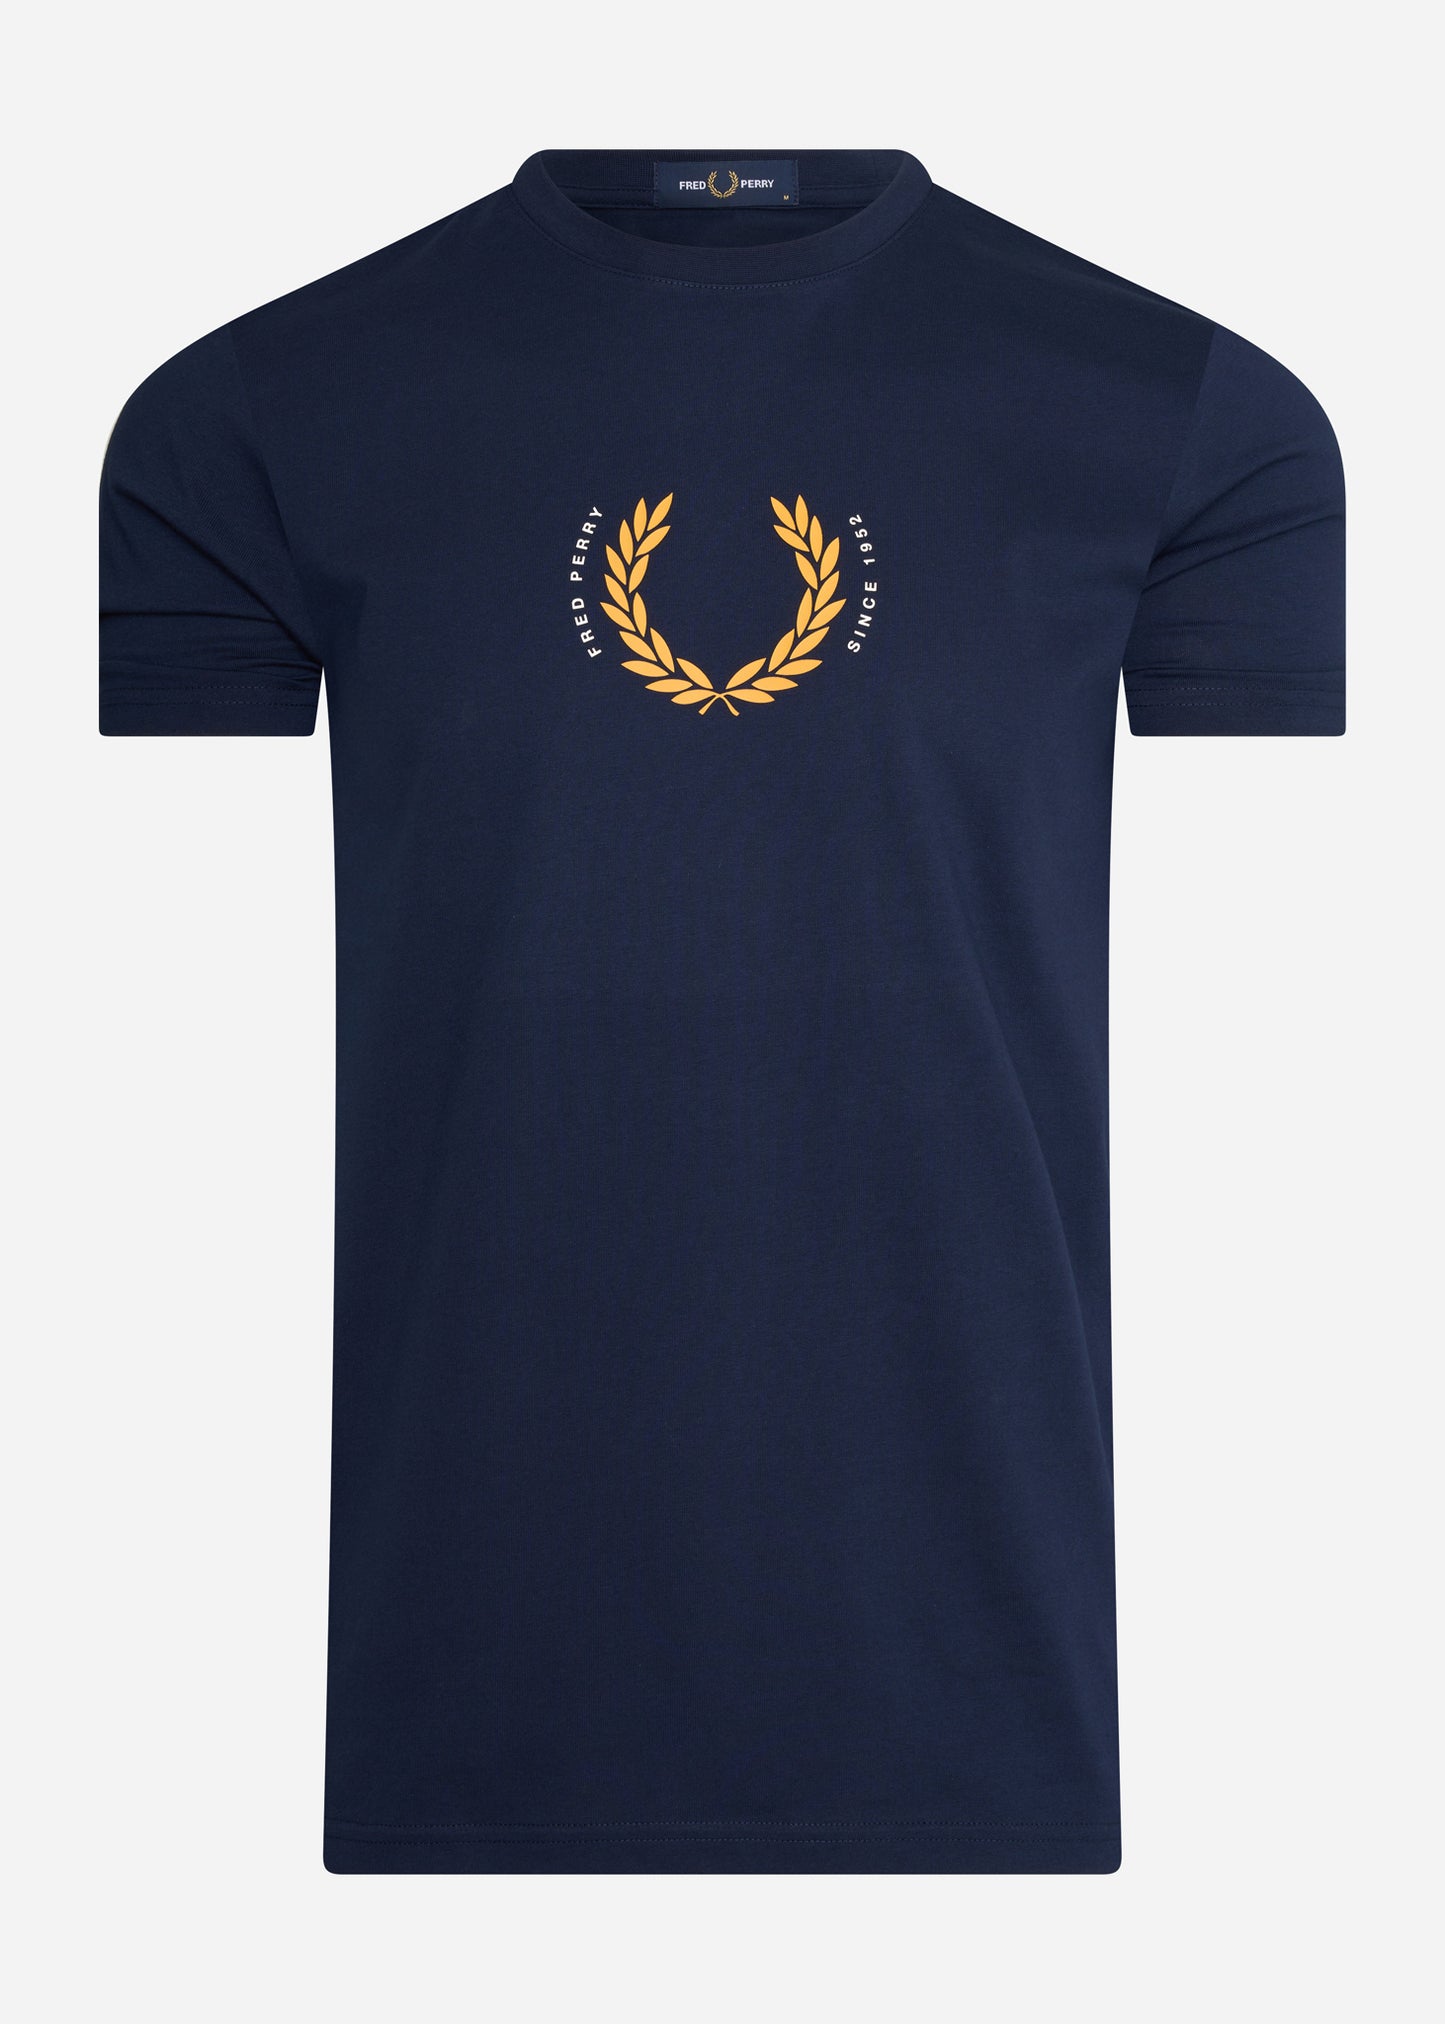 fred perry t-shirt laurel wreath 